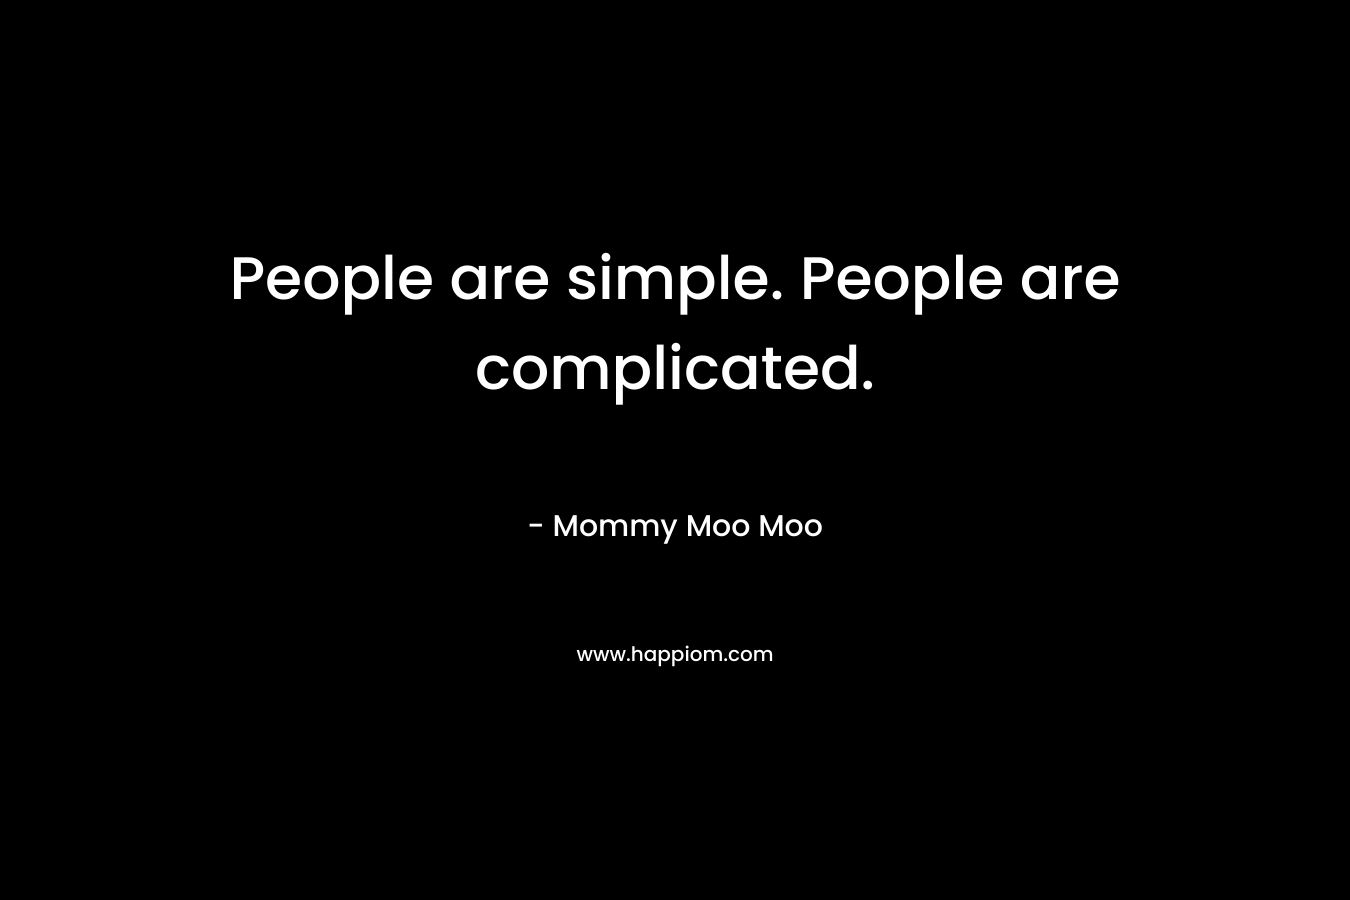 People are simple. People are complicated.